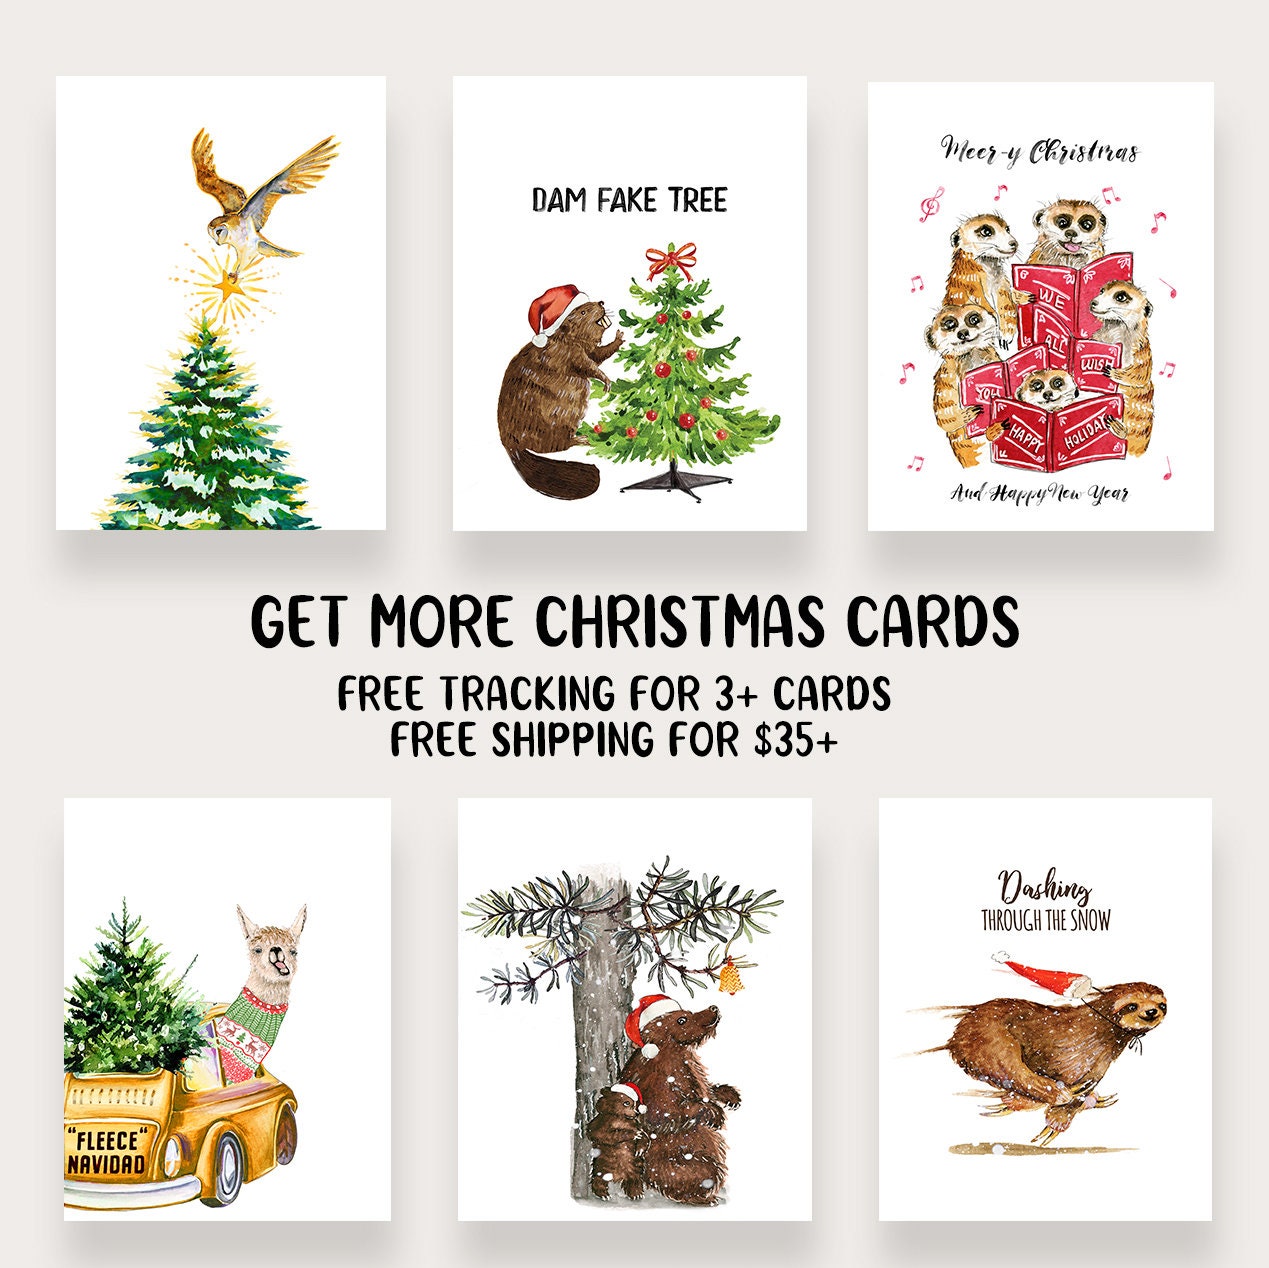 Beaver Funny Christmas Cards For Friends - Dam Fake Christmas Tree Gifts